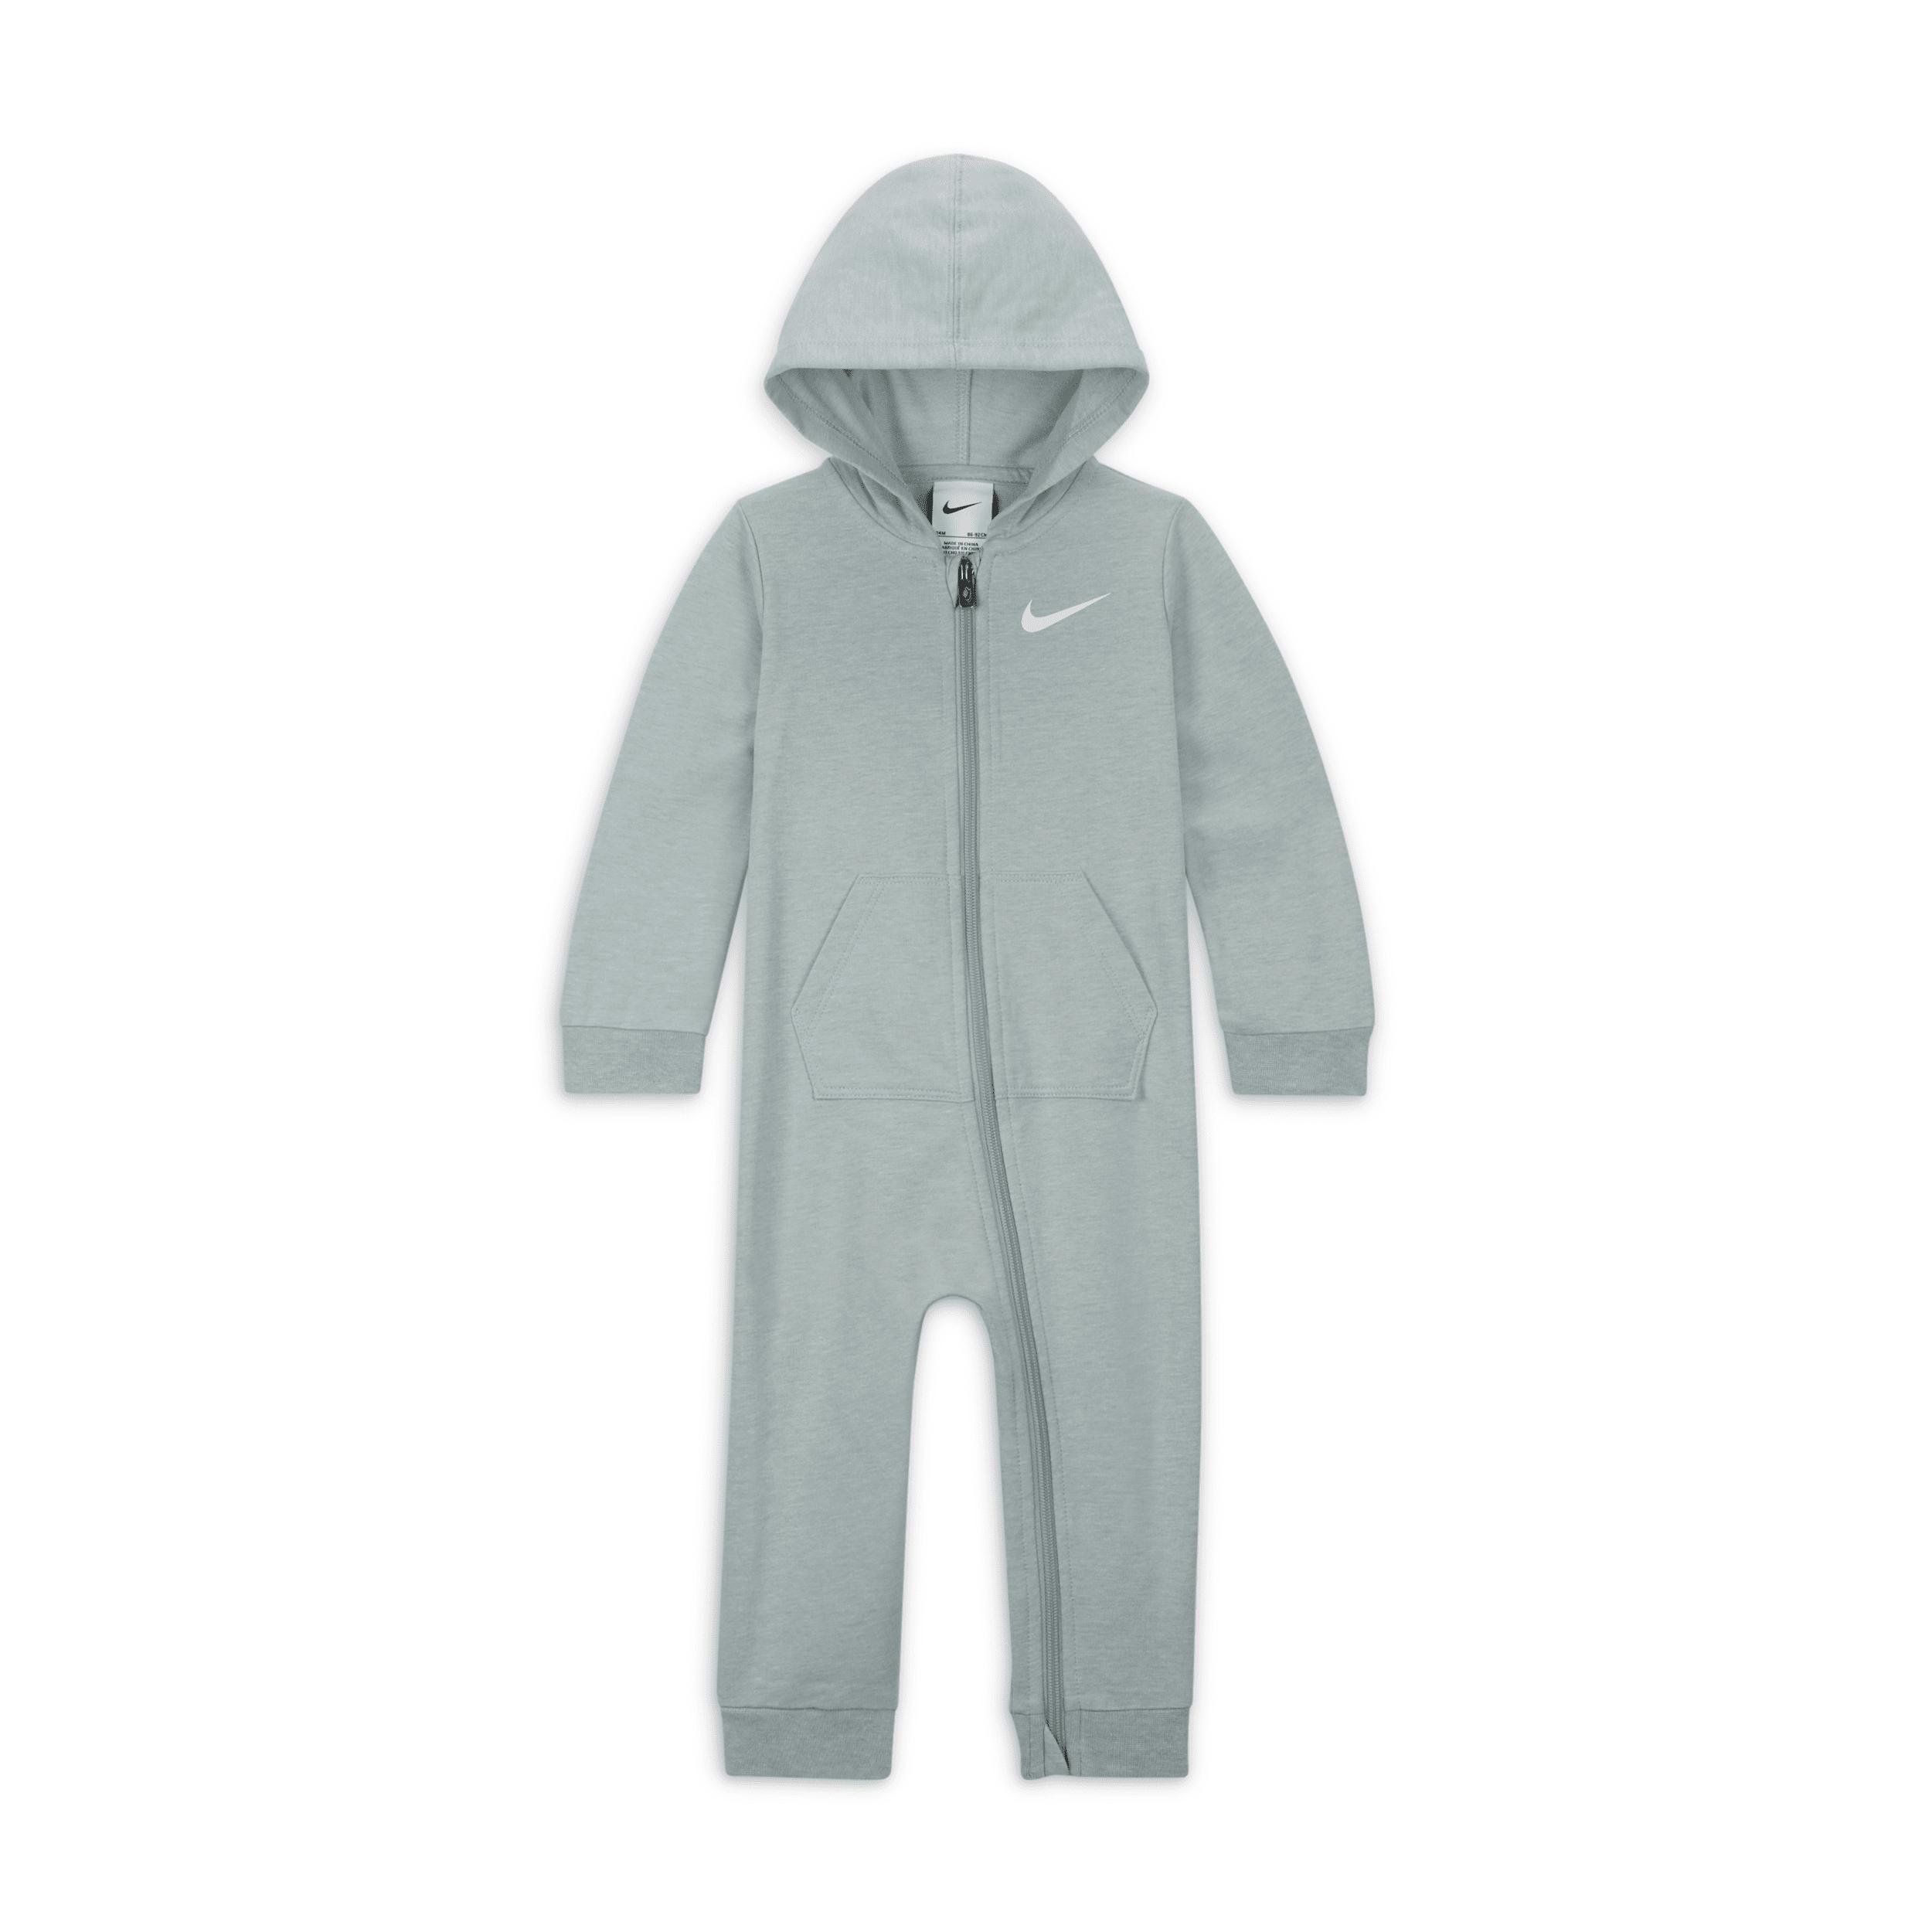 Nike Essentials Baby (12-24M) Hooded Coverall by NIKE